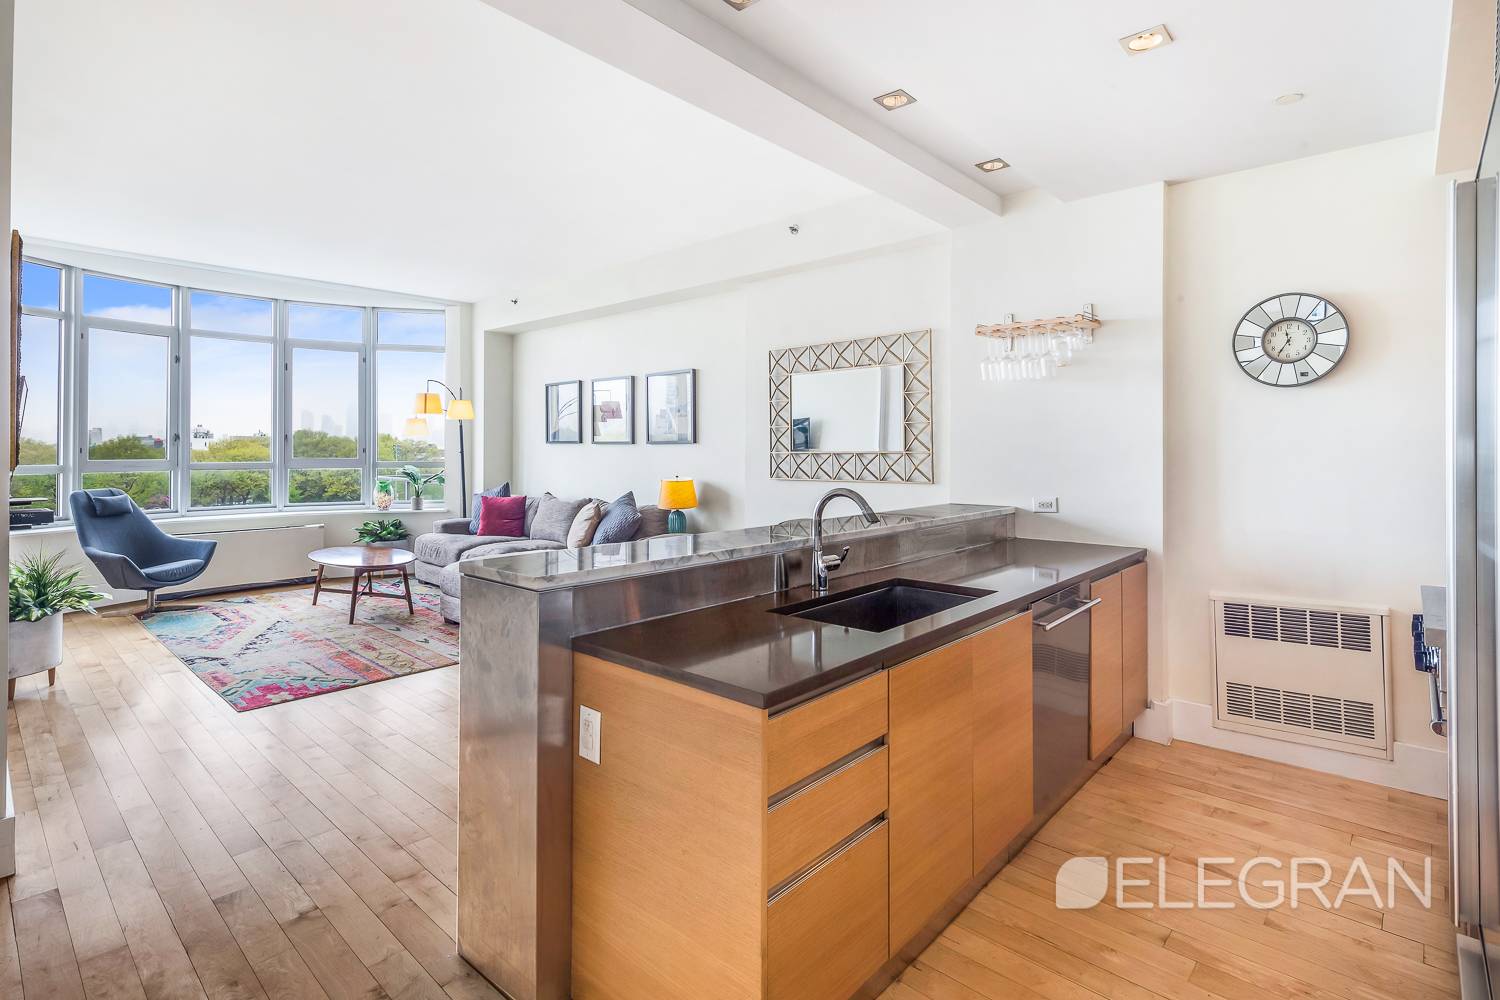 Spacious 3 bedroom, 2 bathroom floor through apartment with sweeping views of McCarren Park and the NYC skyline is now available at one of the premier buildings in the heart ...